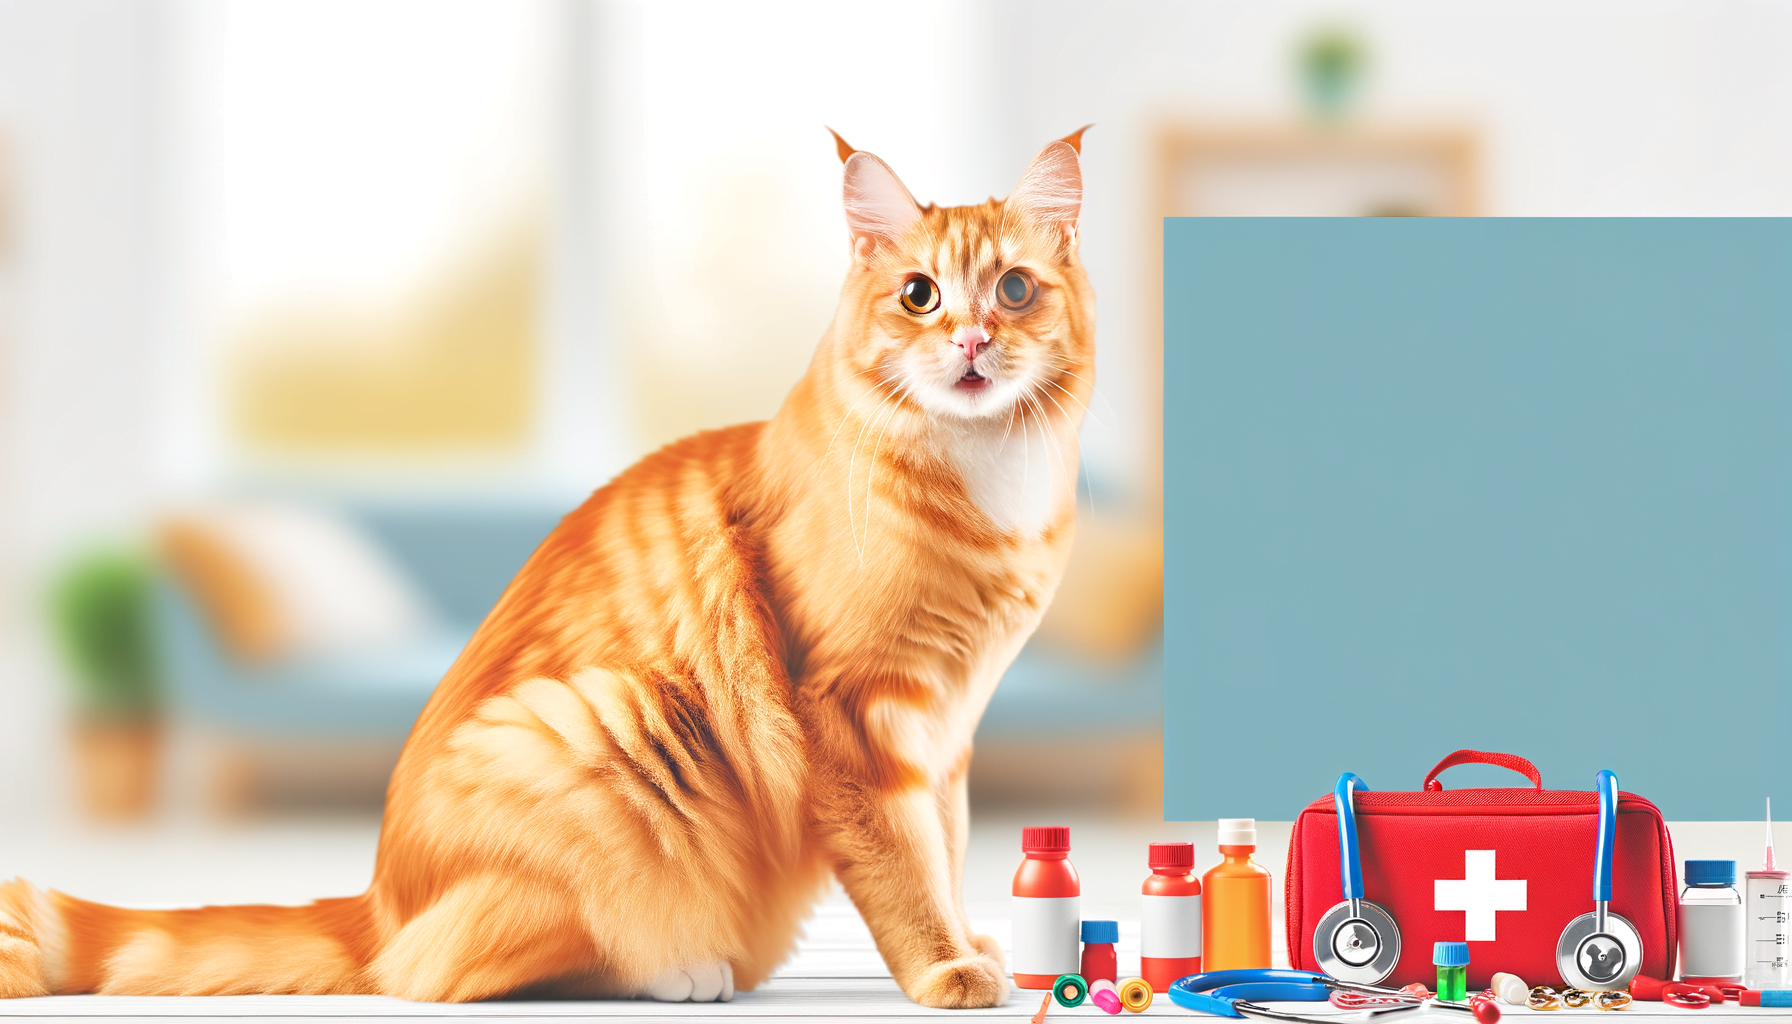 "Debunking Myths: Do Orange Cats Really Face More Health Problems?"